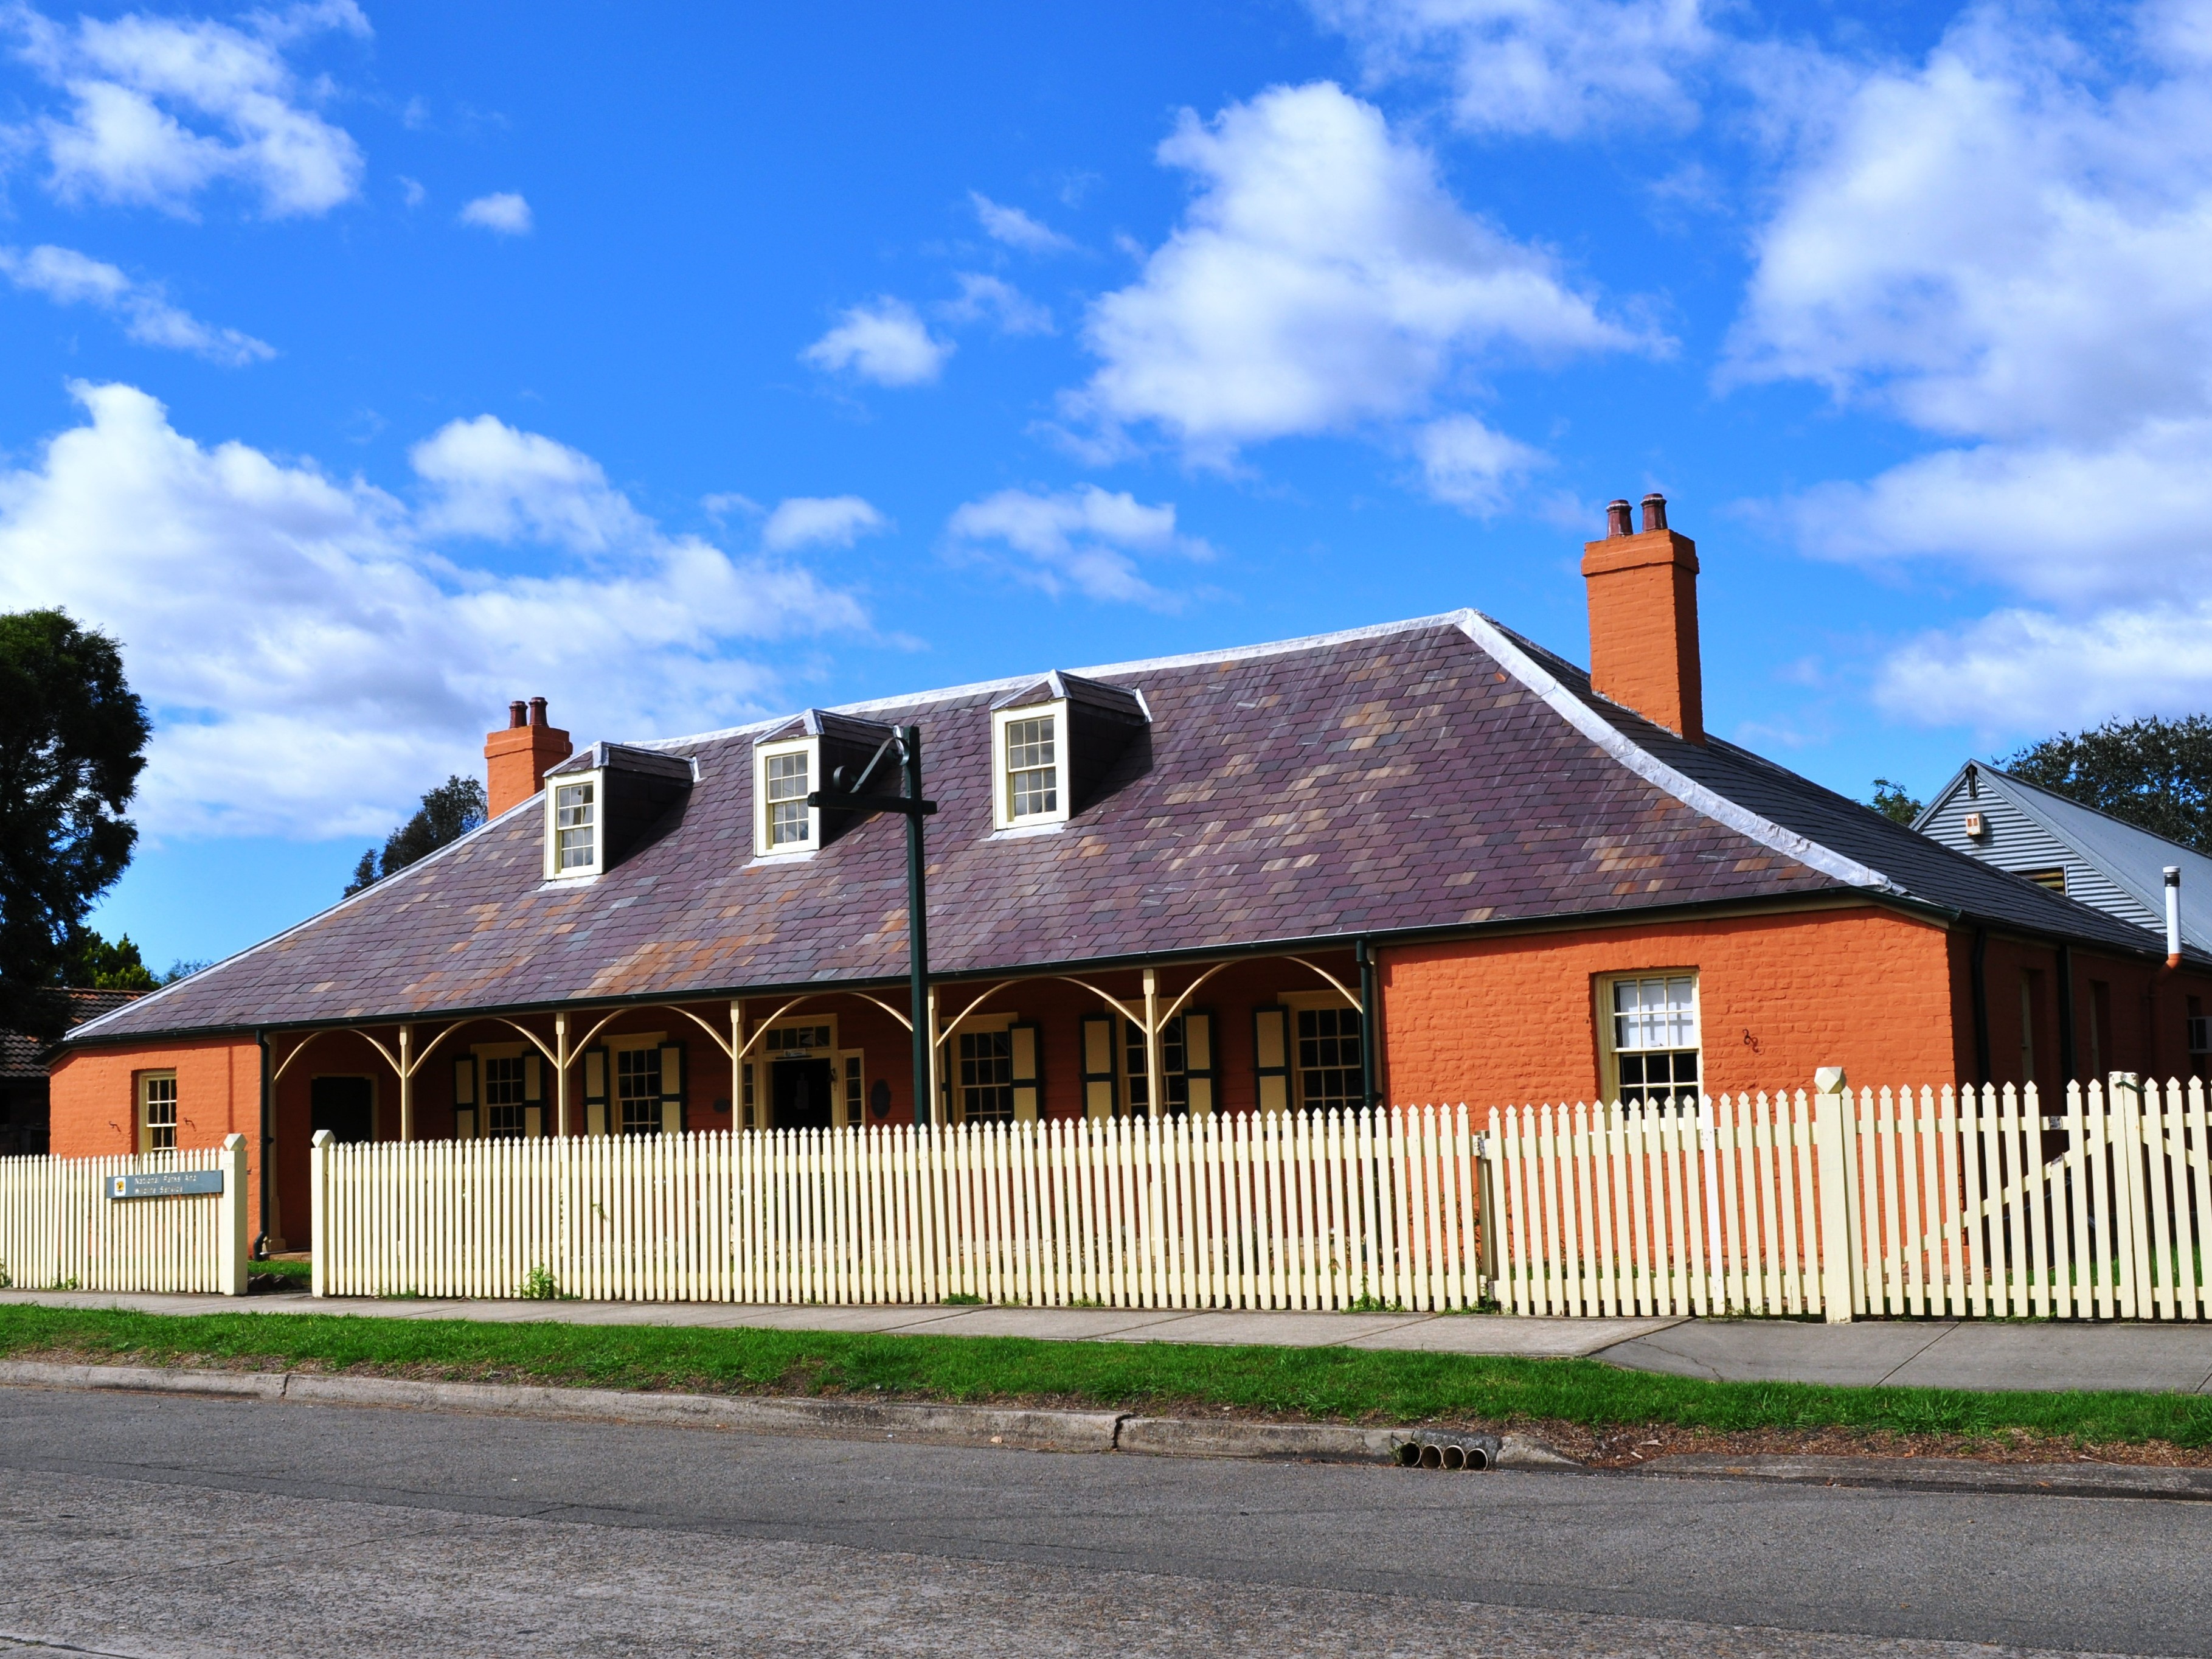 Bowman Cottage Richmond NSW - an example of local heritage